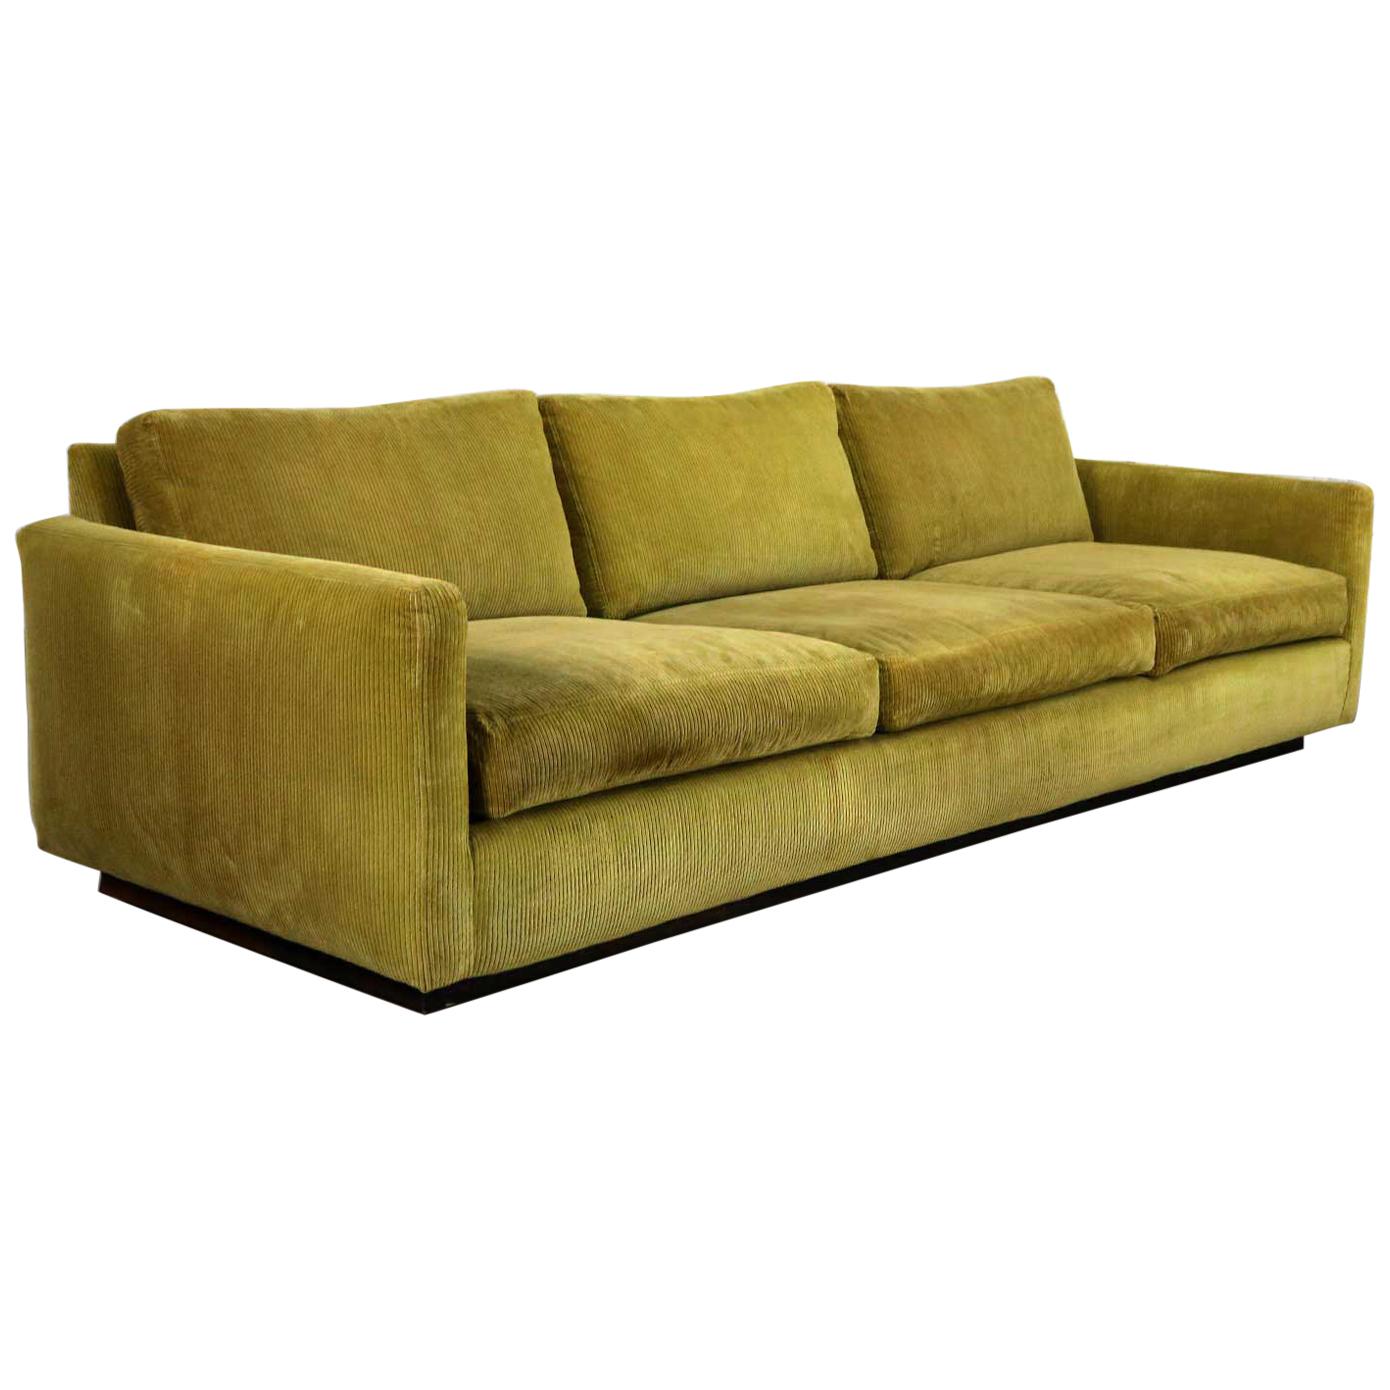 Lawson Style Wide Wale Corduroy Sofa By